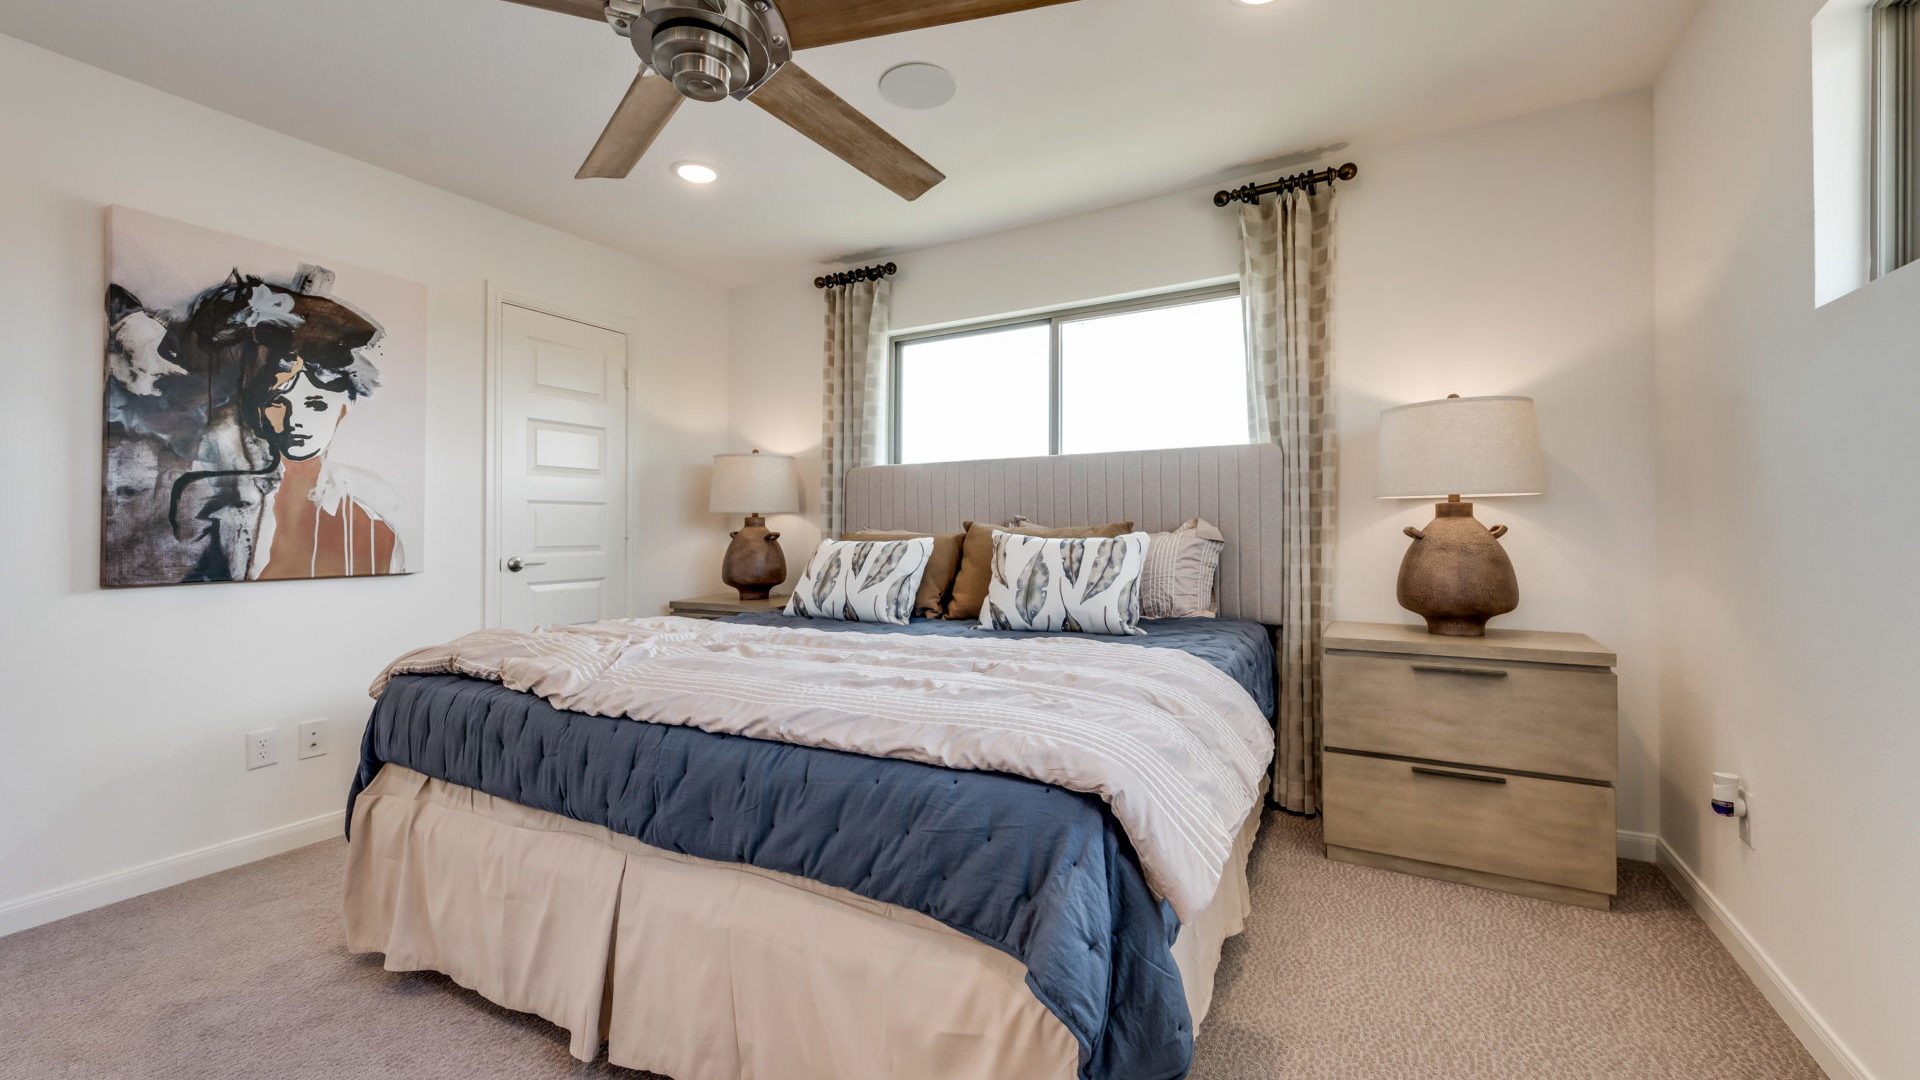 Lake Park Villas - New Model Now Open! new homes in Wylie, TX